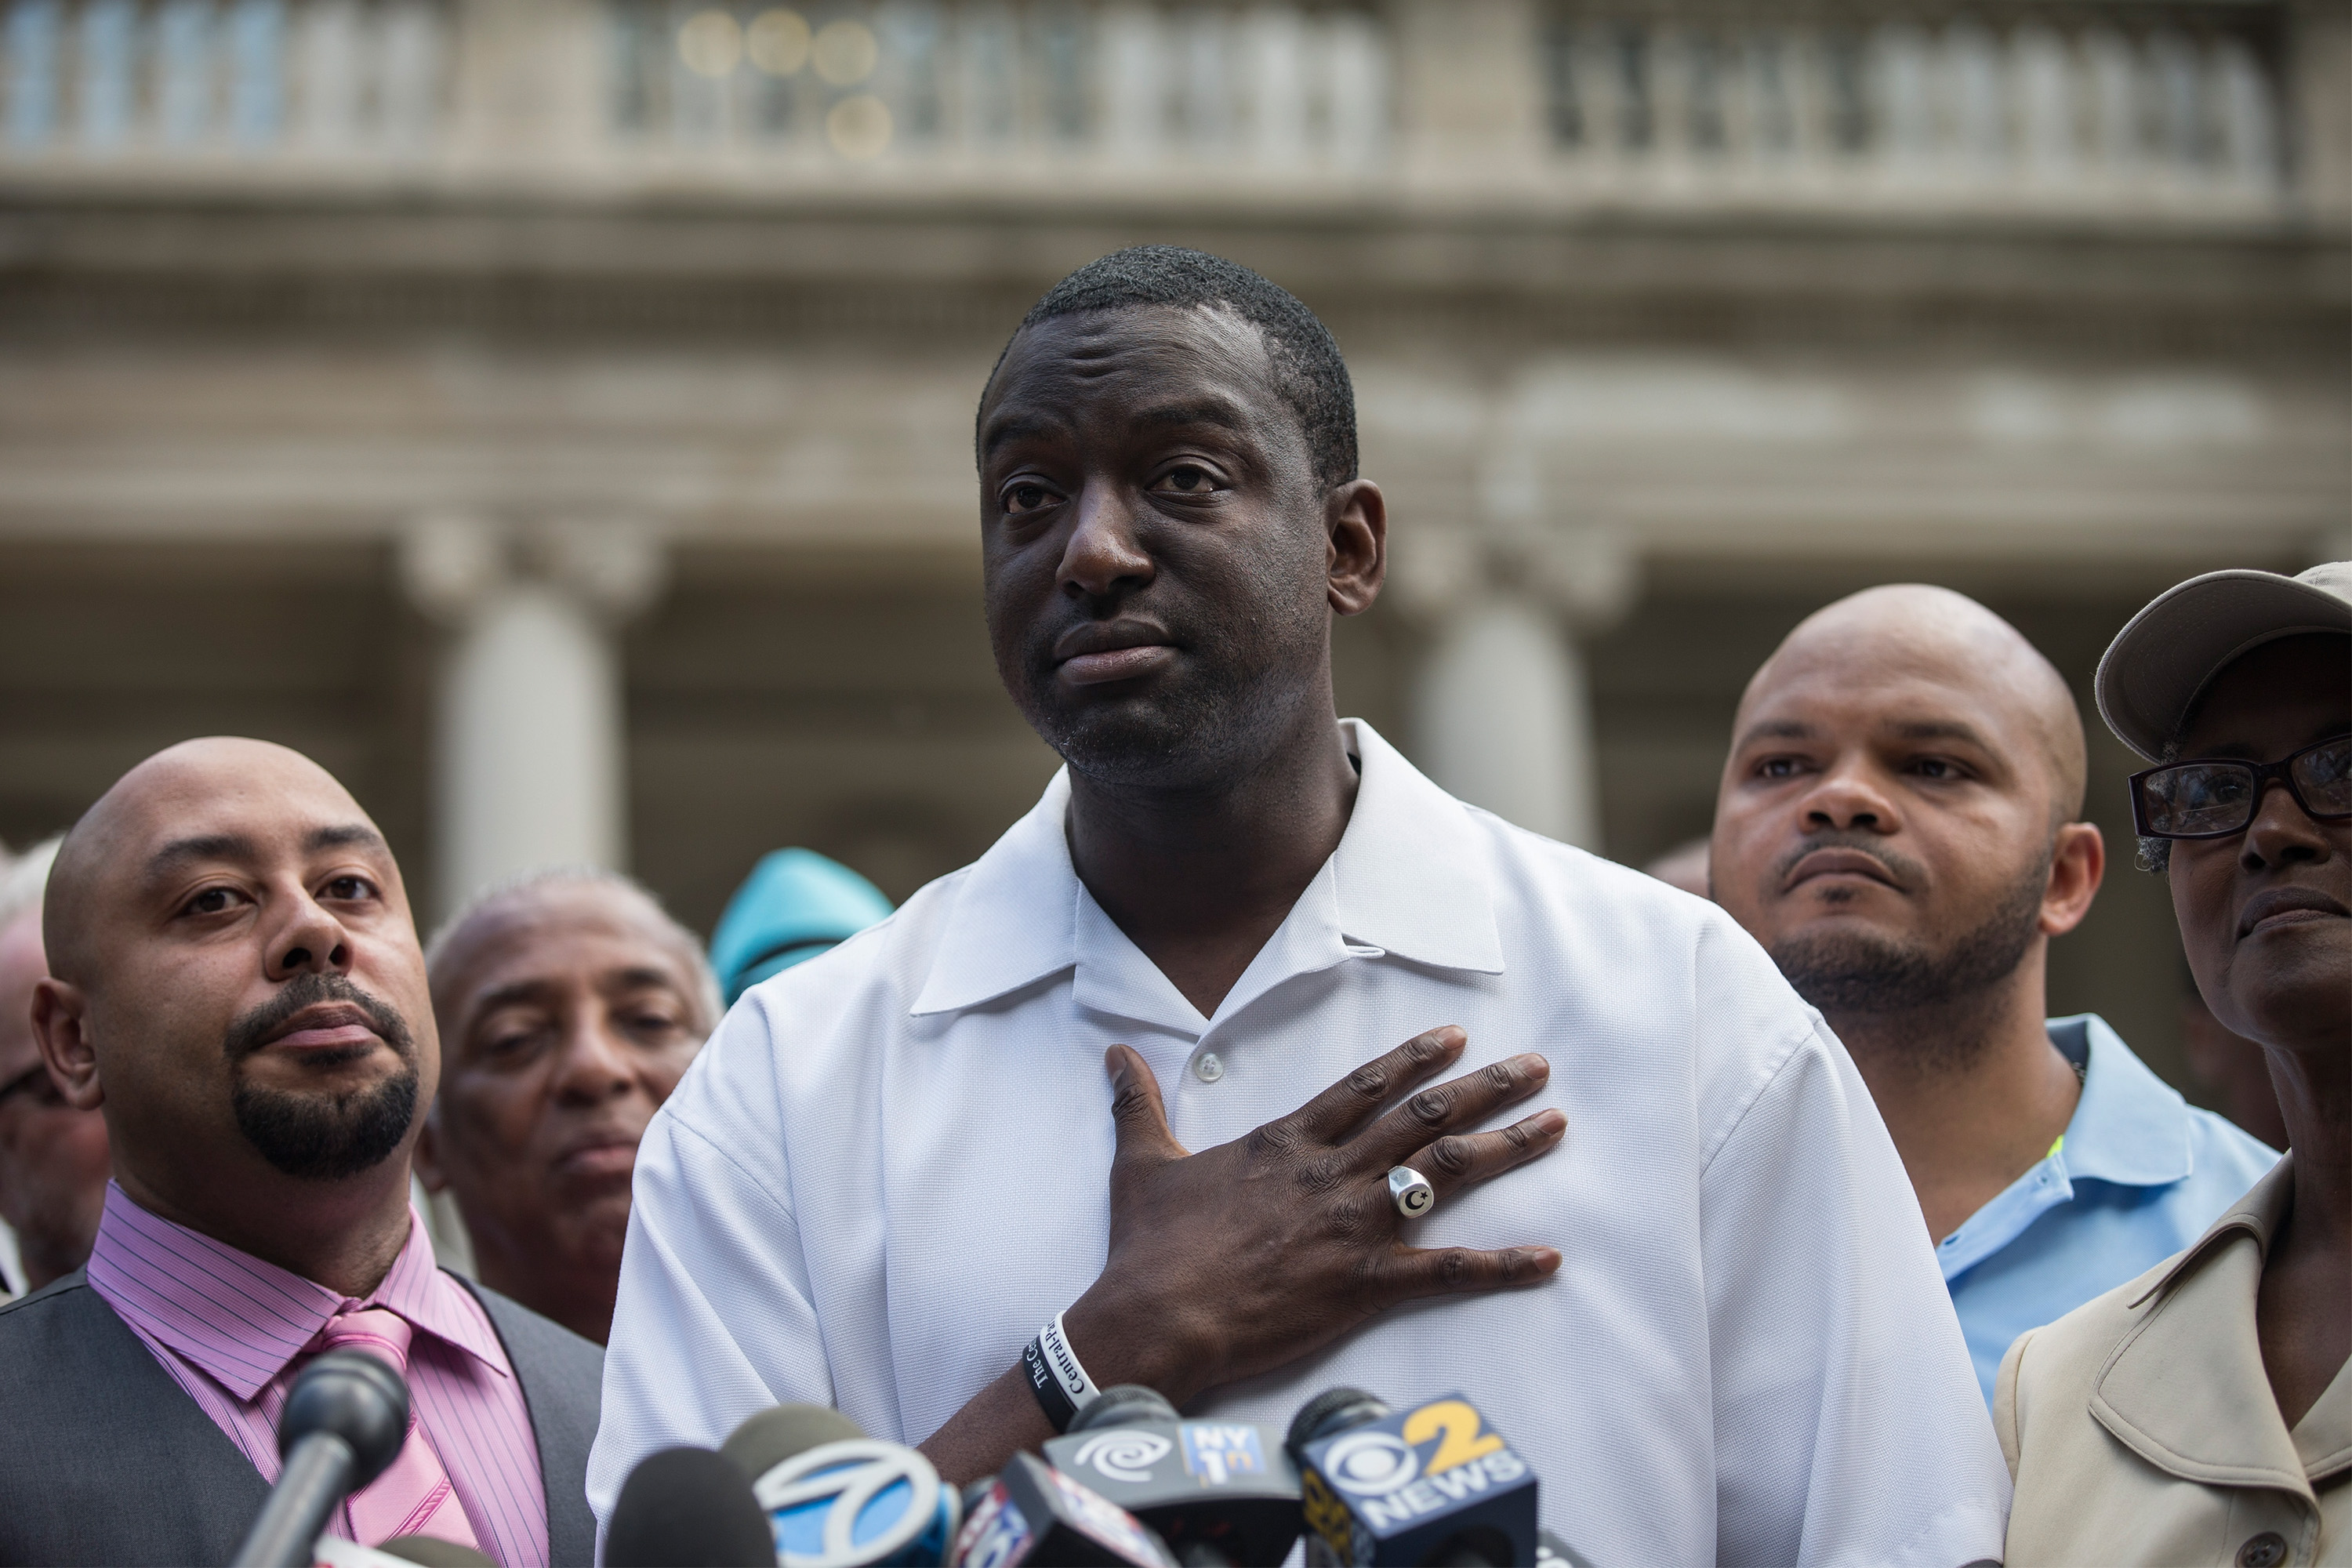 Yusef Salaam Says He Was Pulled Over By NYPD With No Explanation